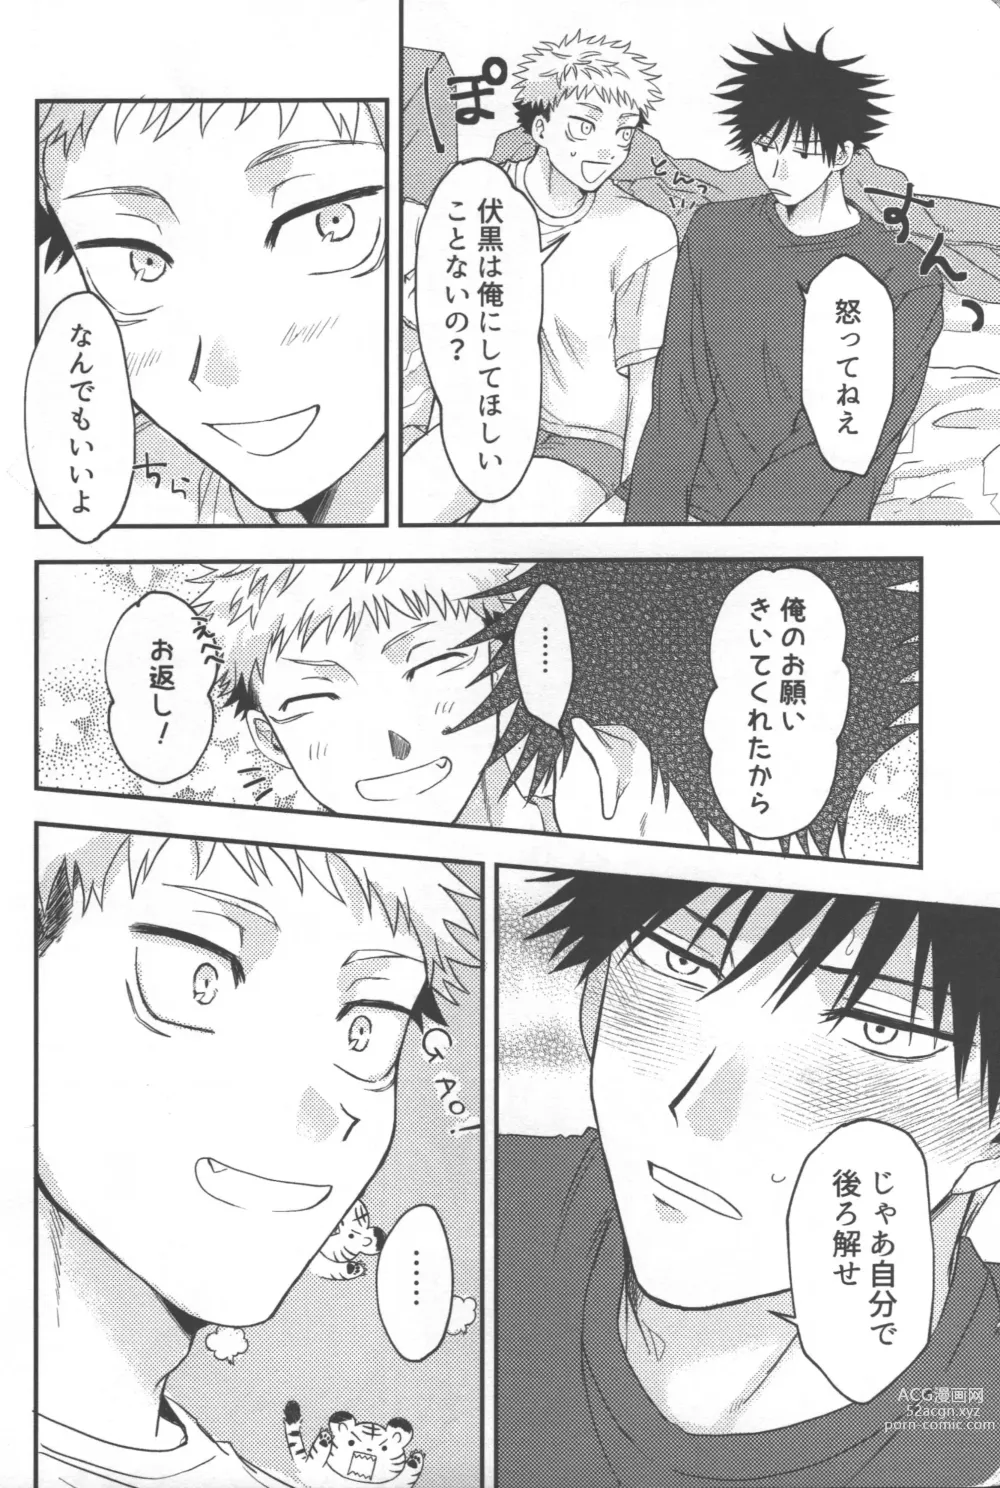 Page 21 of doujinshi Dont Look at ME Like That.